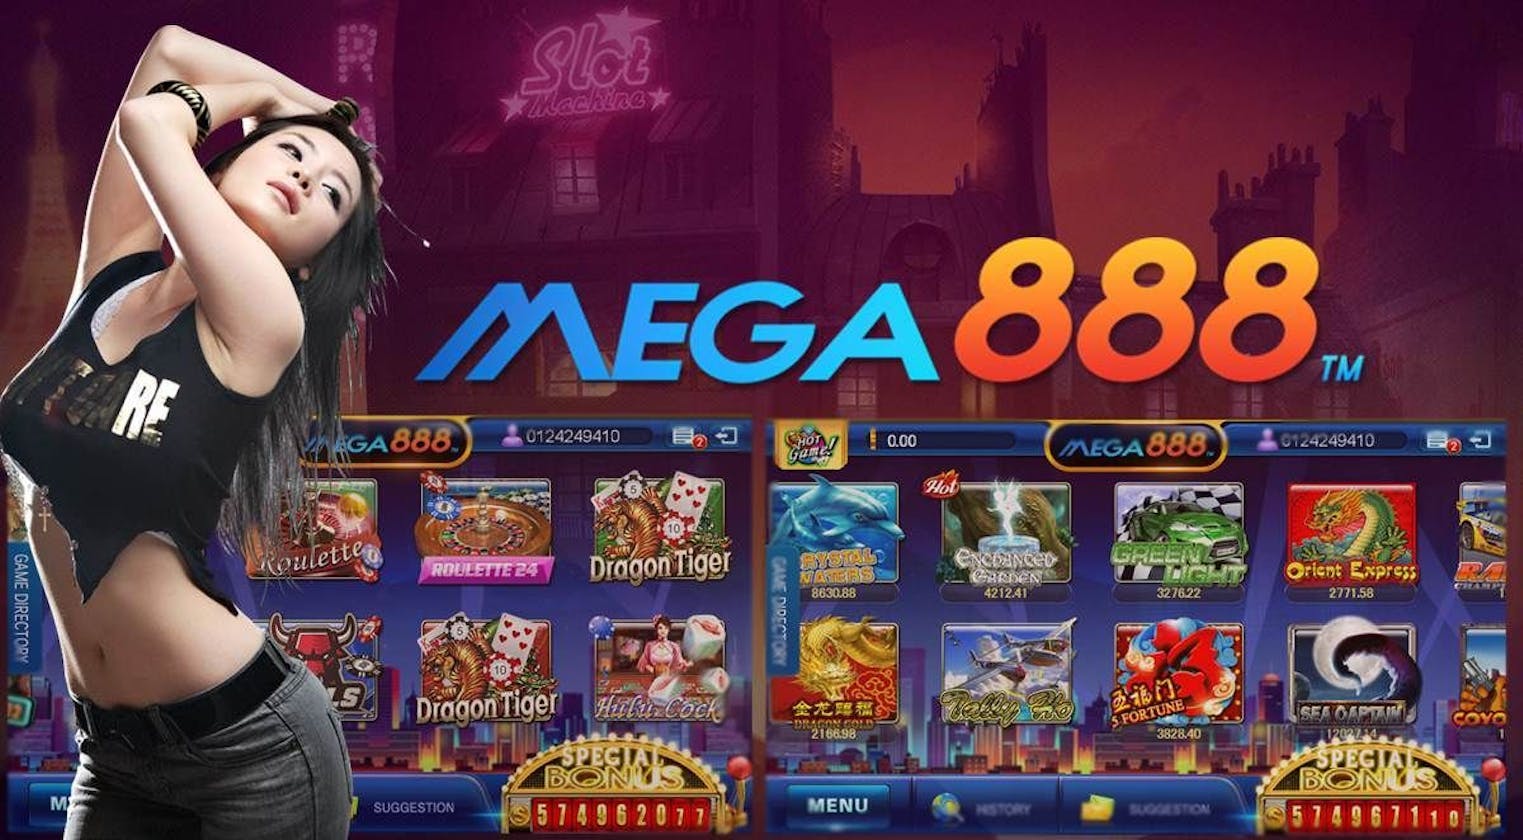 How to Download and Install Mega888 on Android Devices